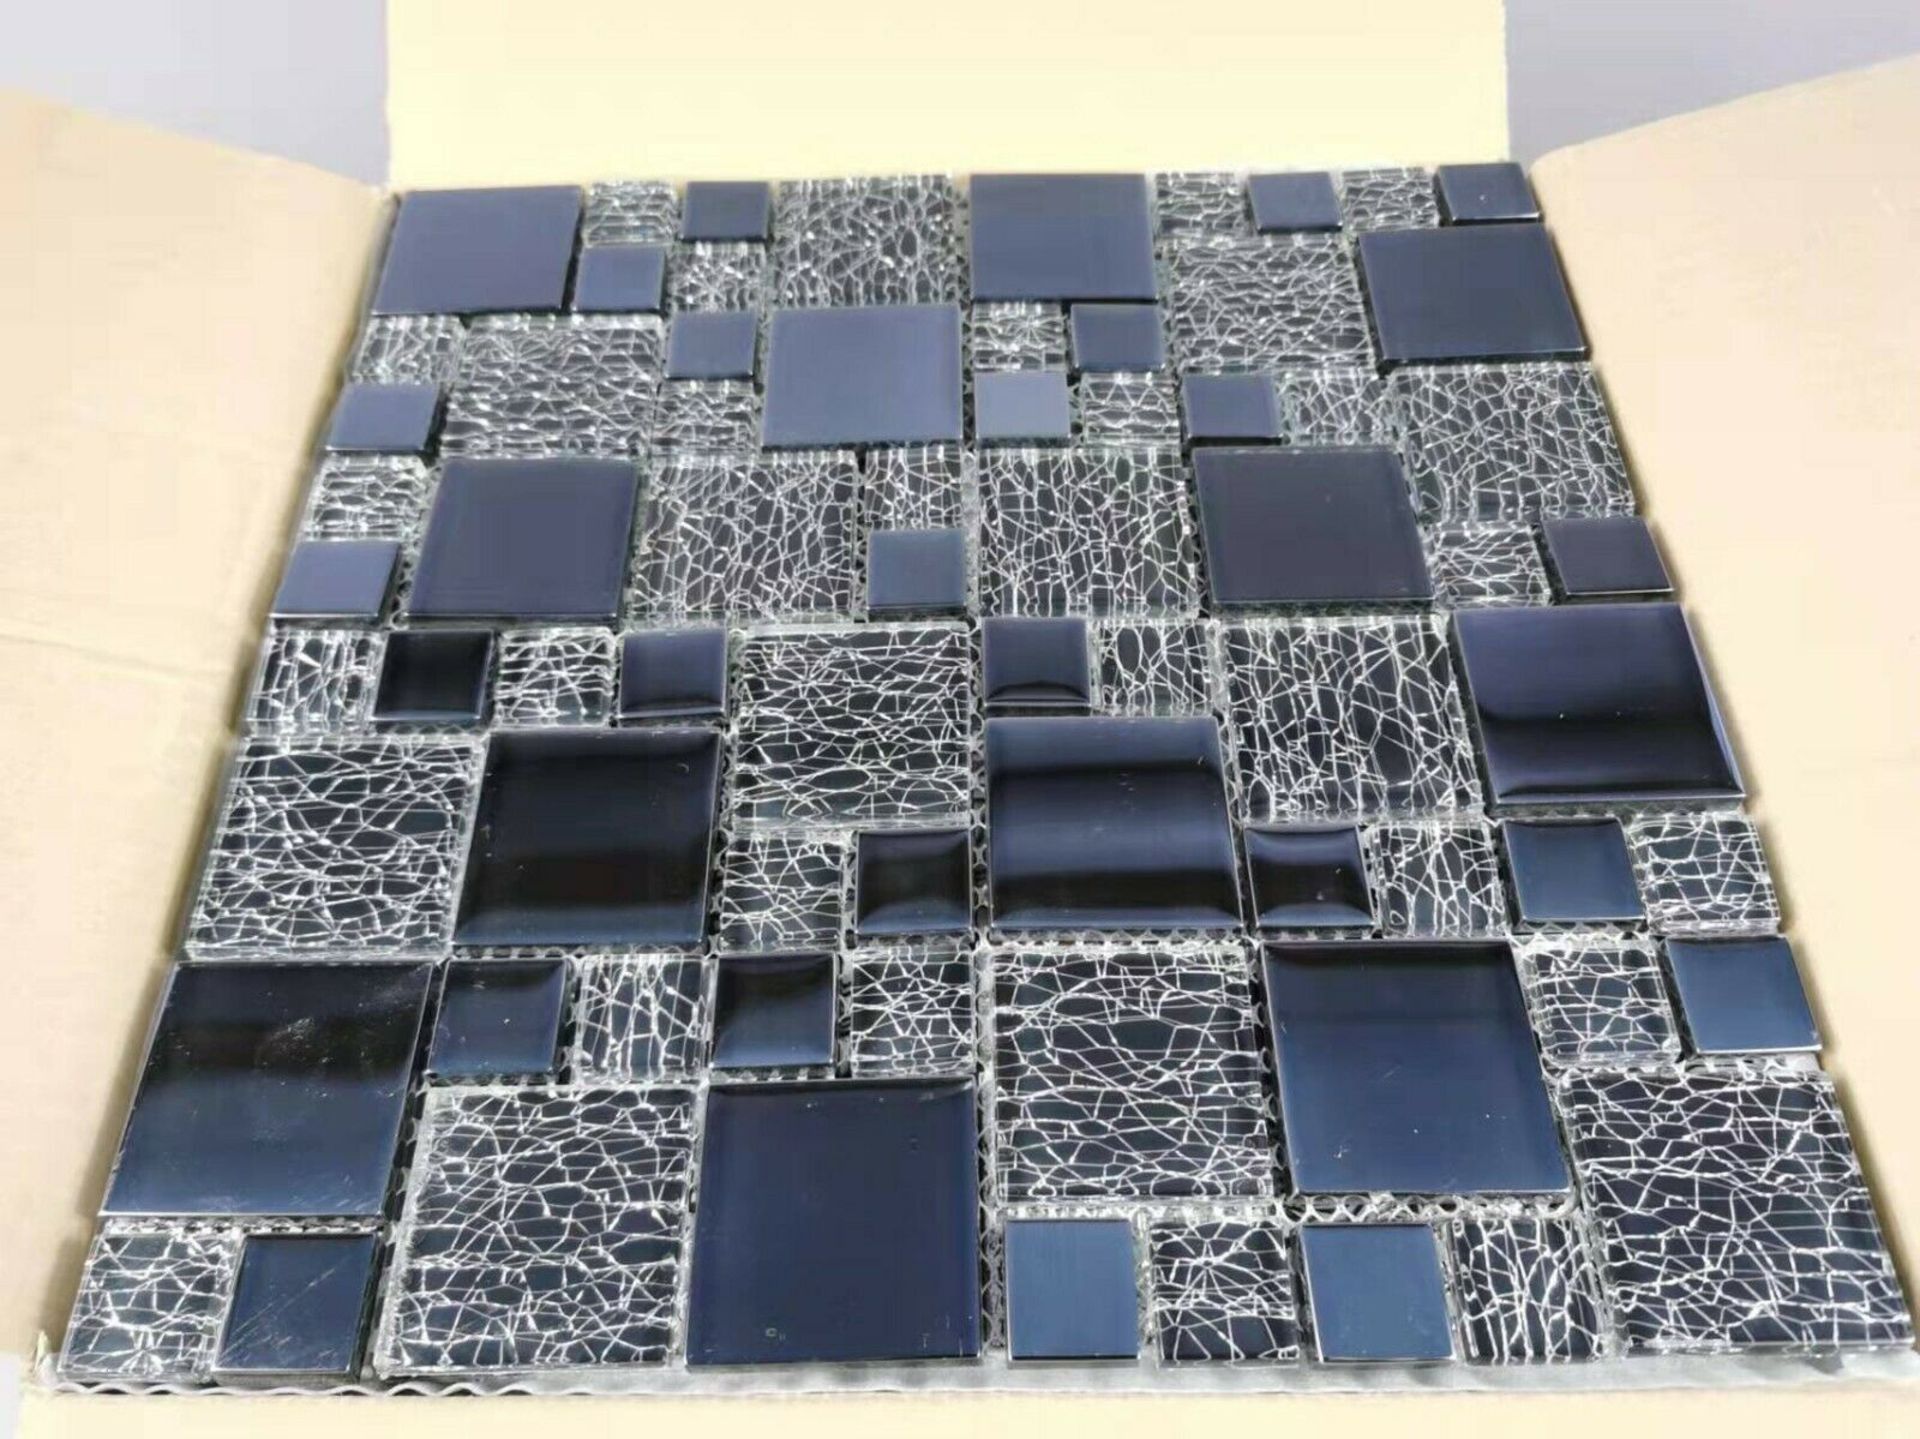 10 Square Metres - High Quality Glass/Stainless Steel Mosaic Tiles -110 sheets - Image 2 of 5